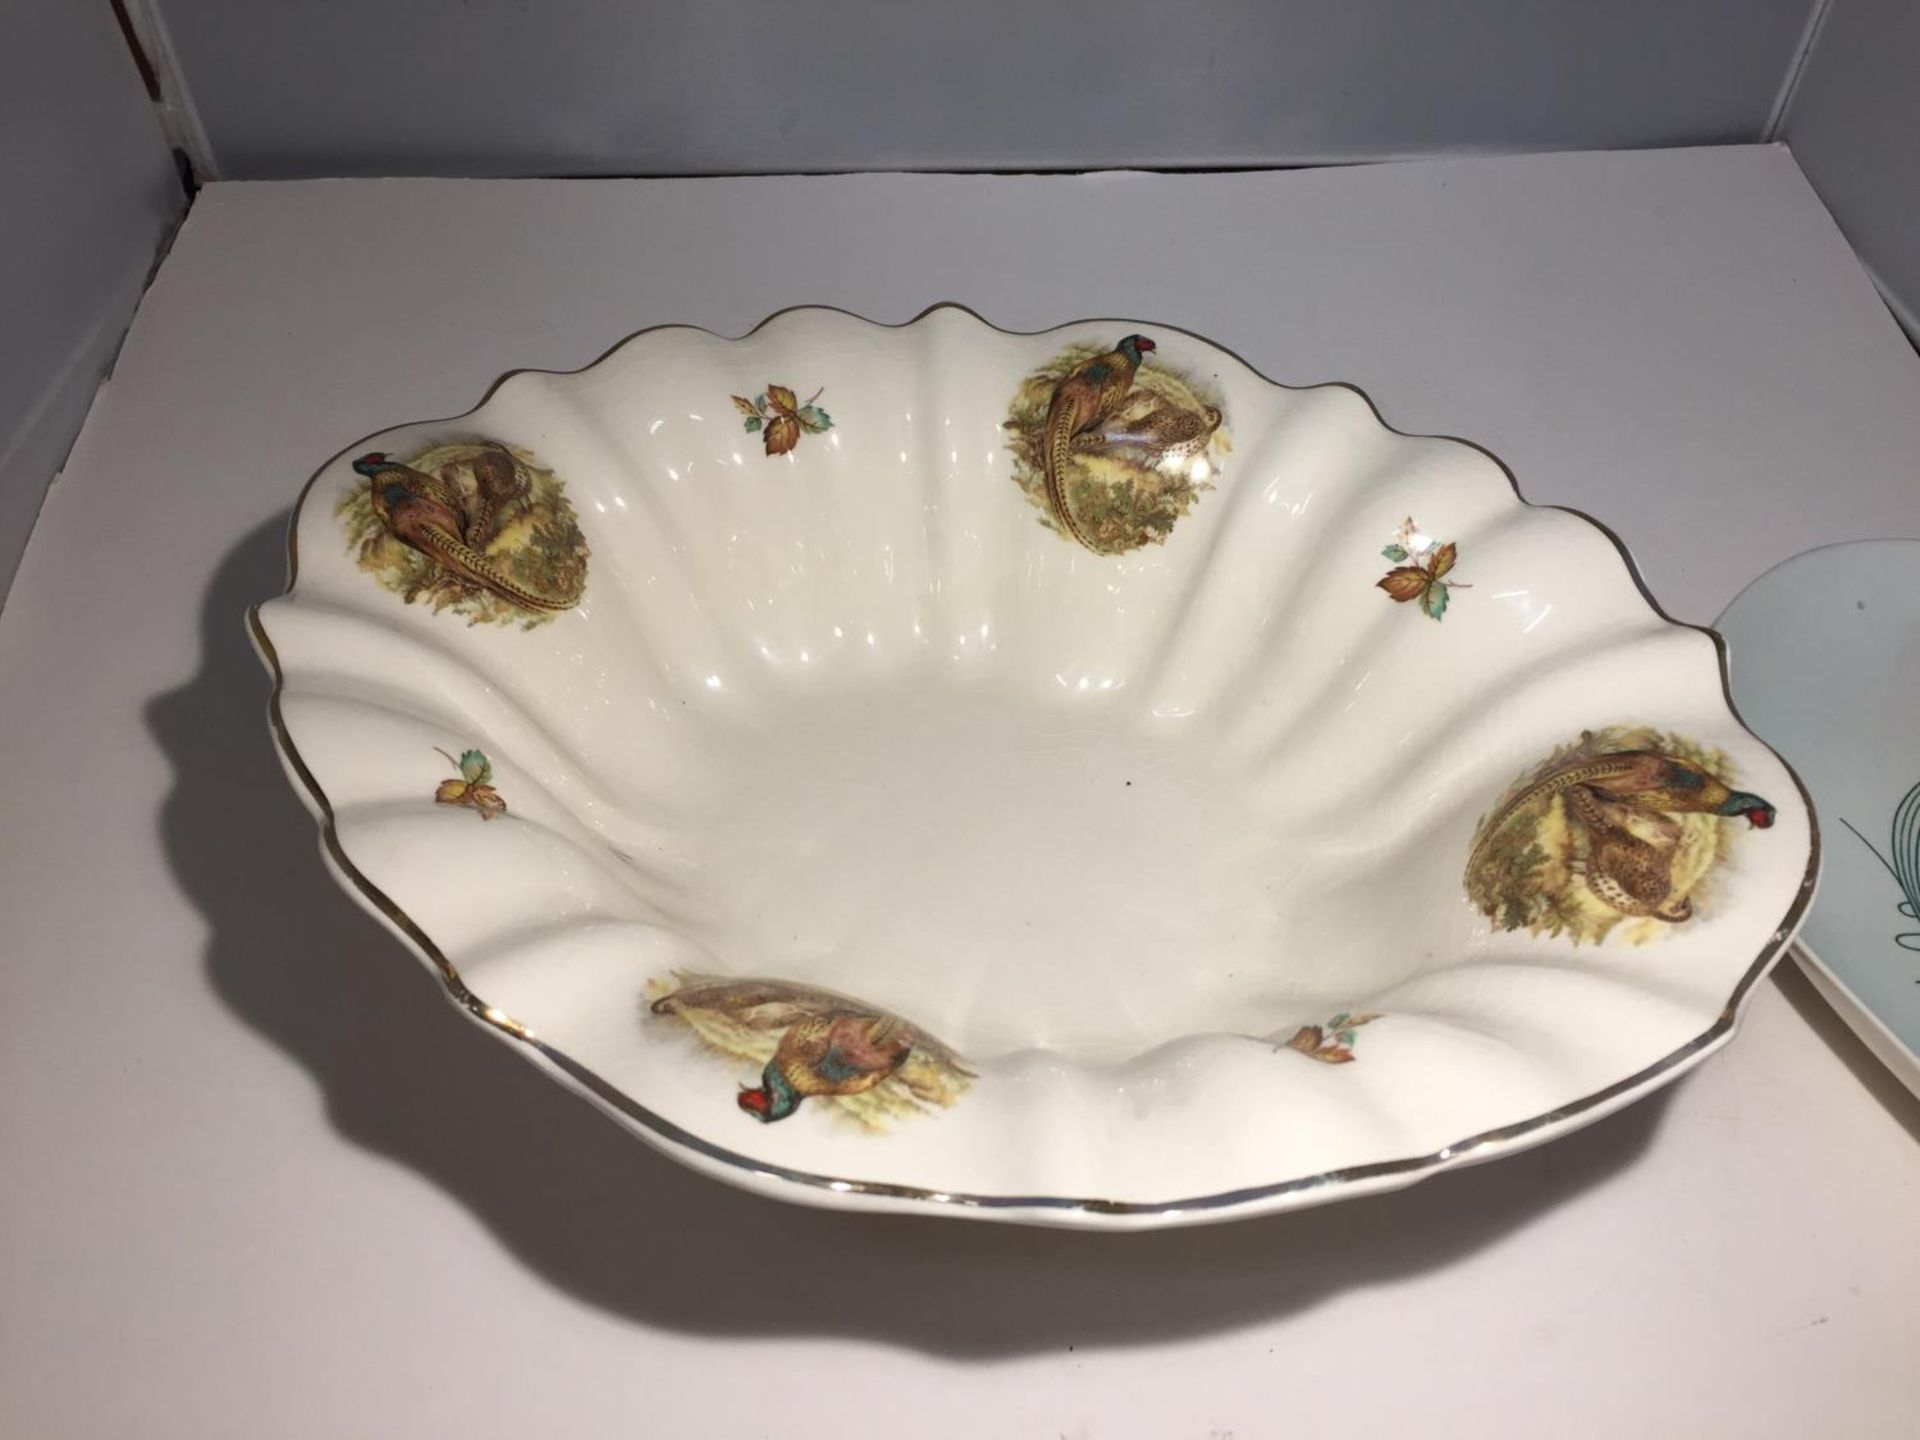 A STAFFORDSHIRE IRONSTONE DISH IN A PHEASANT DESIGN AND A CARLTONWARE SERVING DISH - Image 3 of 4